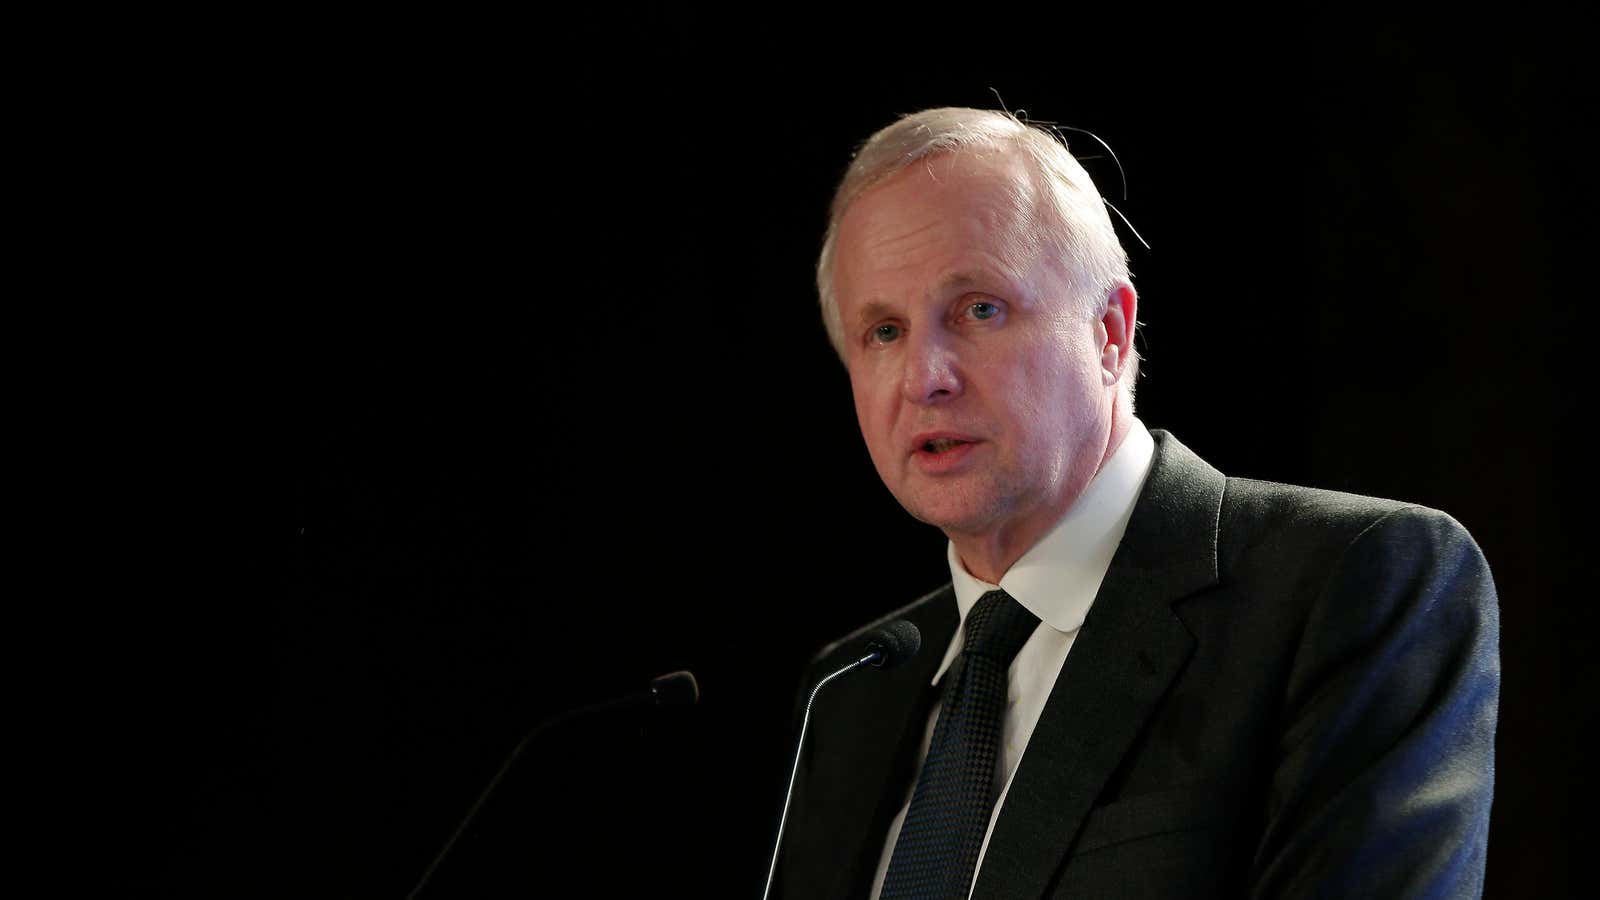 “The oil prices in the world are too high,” said Bob Dudley at a conference in The Hague.